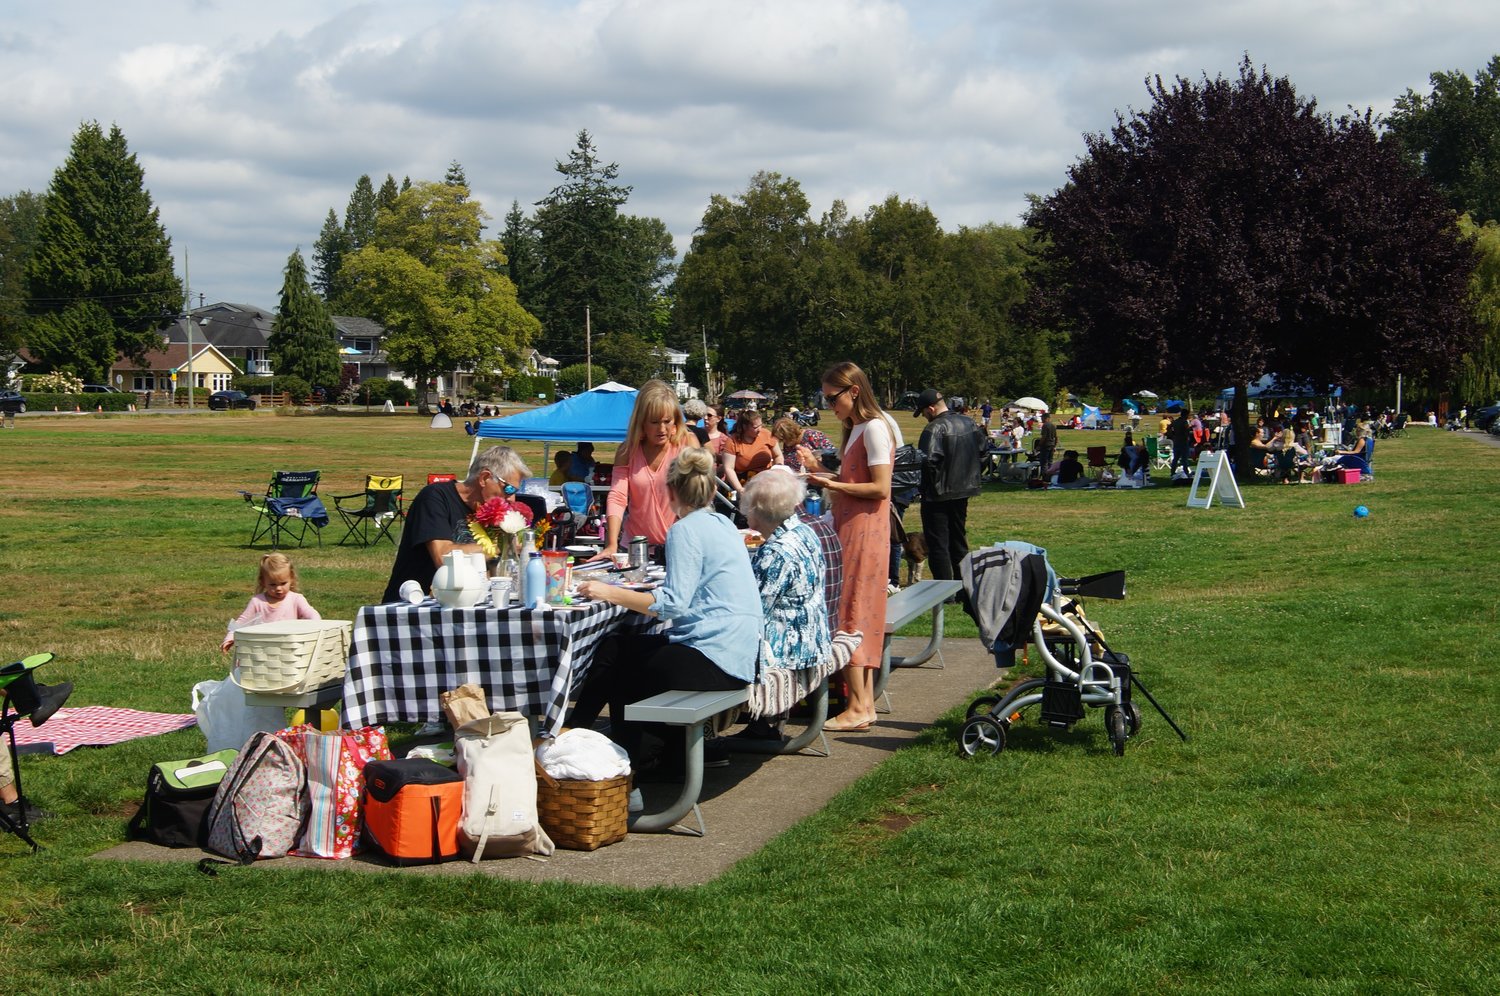 Peace Arch Park on August 21 provided a unique area for cross-border loved ones to meet during the U.S./Canada border restrictions to non-essential travel.